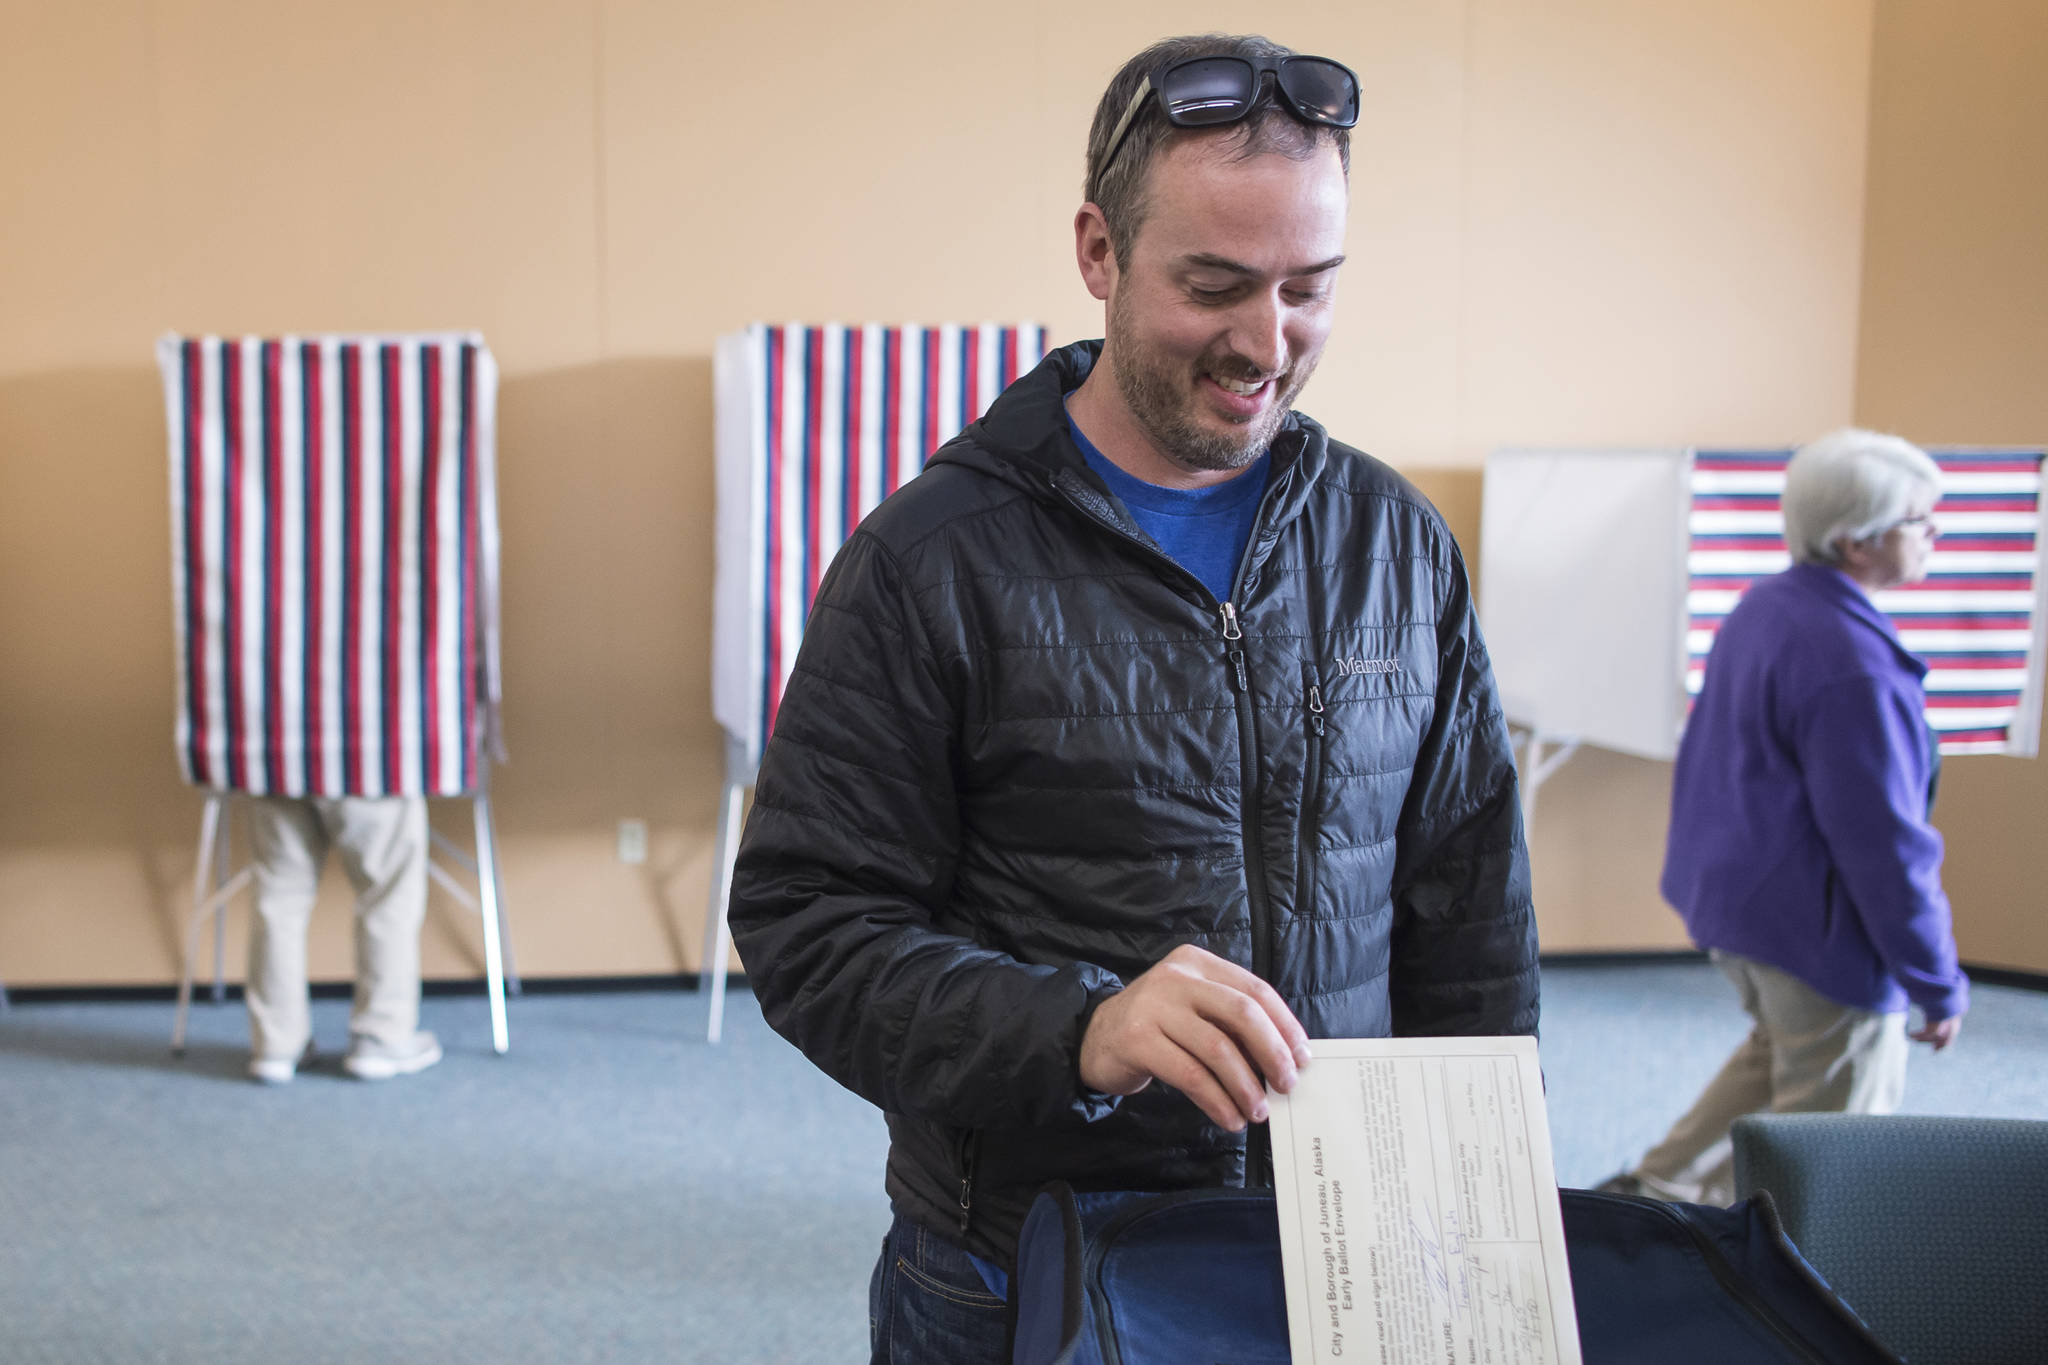 Trenton English takes advantage of early voting in the municipal election at the Mendenhall Mall Annex on Monday, Sept. 17, 2018. (Michael Penn | Juneau Empire)